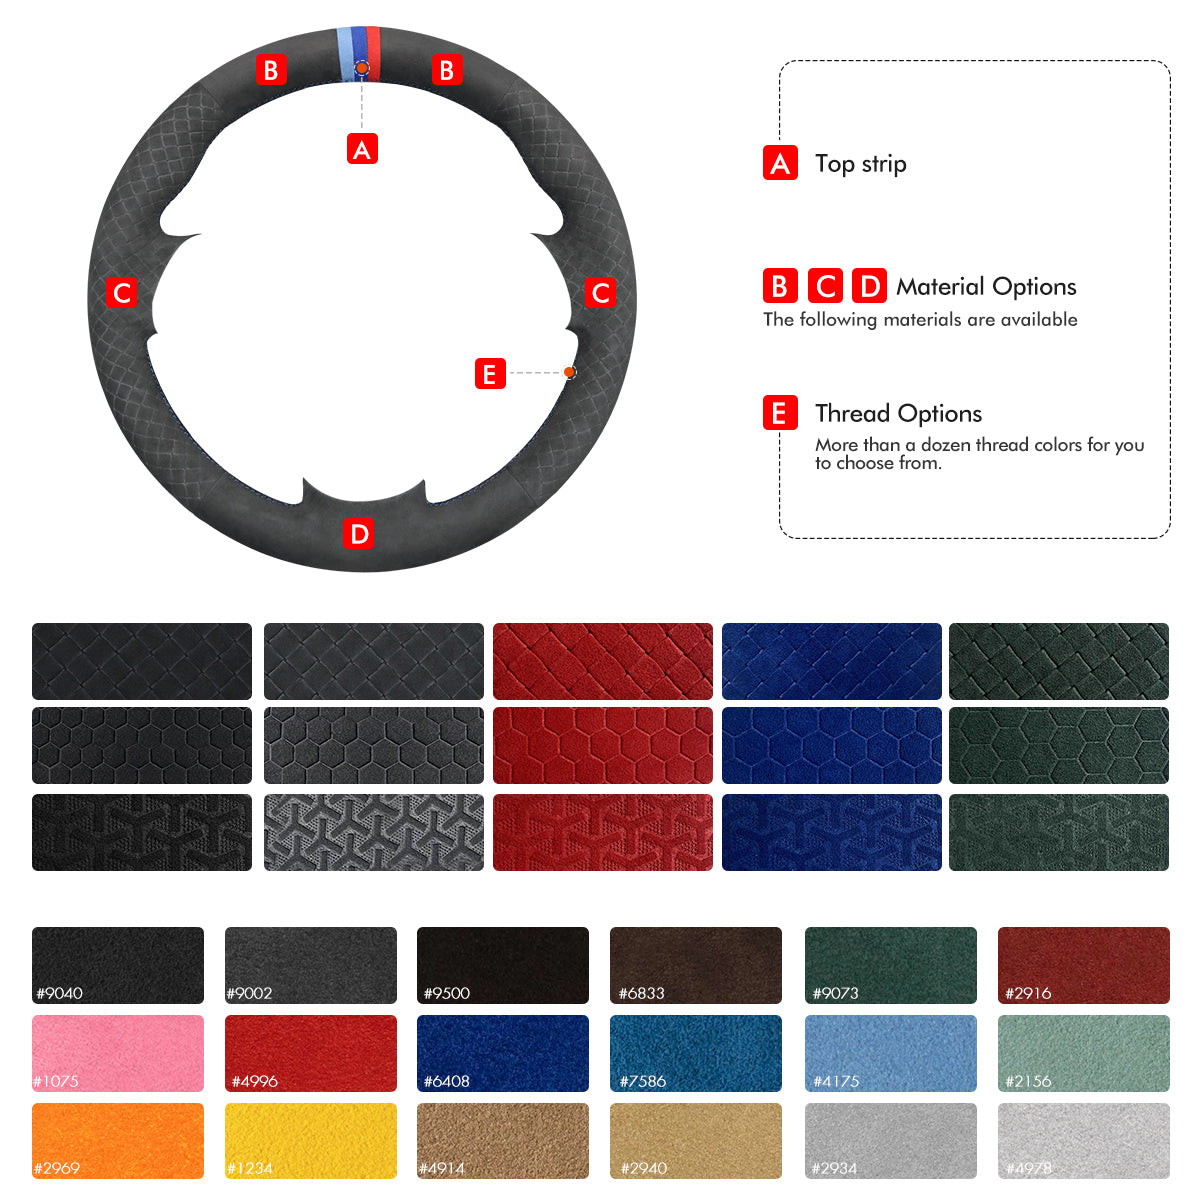 MEWANT Hand Stitch Carbon Fiber Suede Car Steering Wheel Cover for Kia K5 Optima 2014-2015